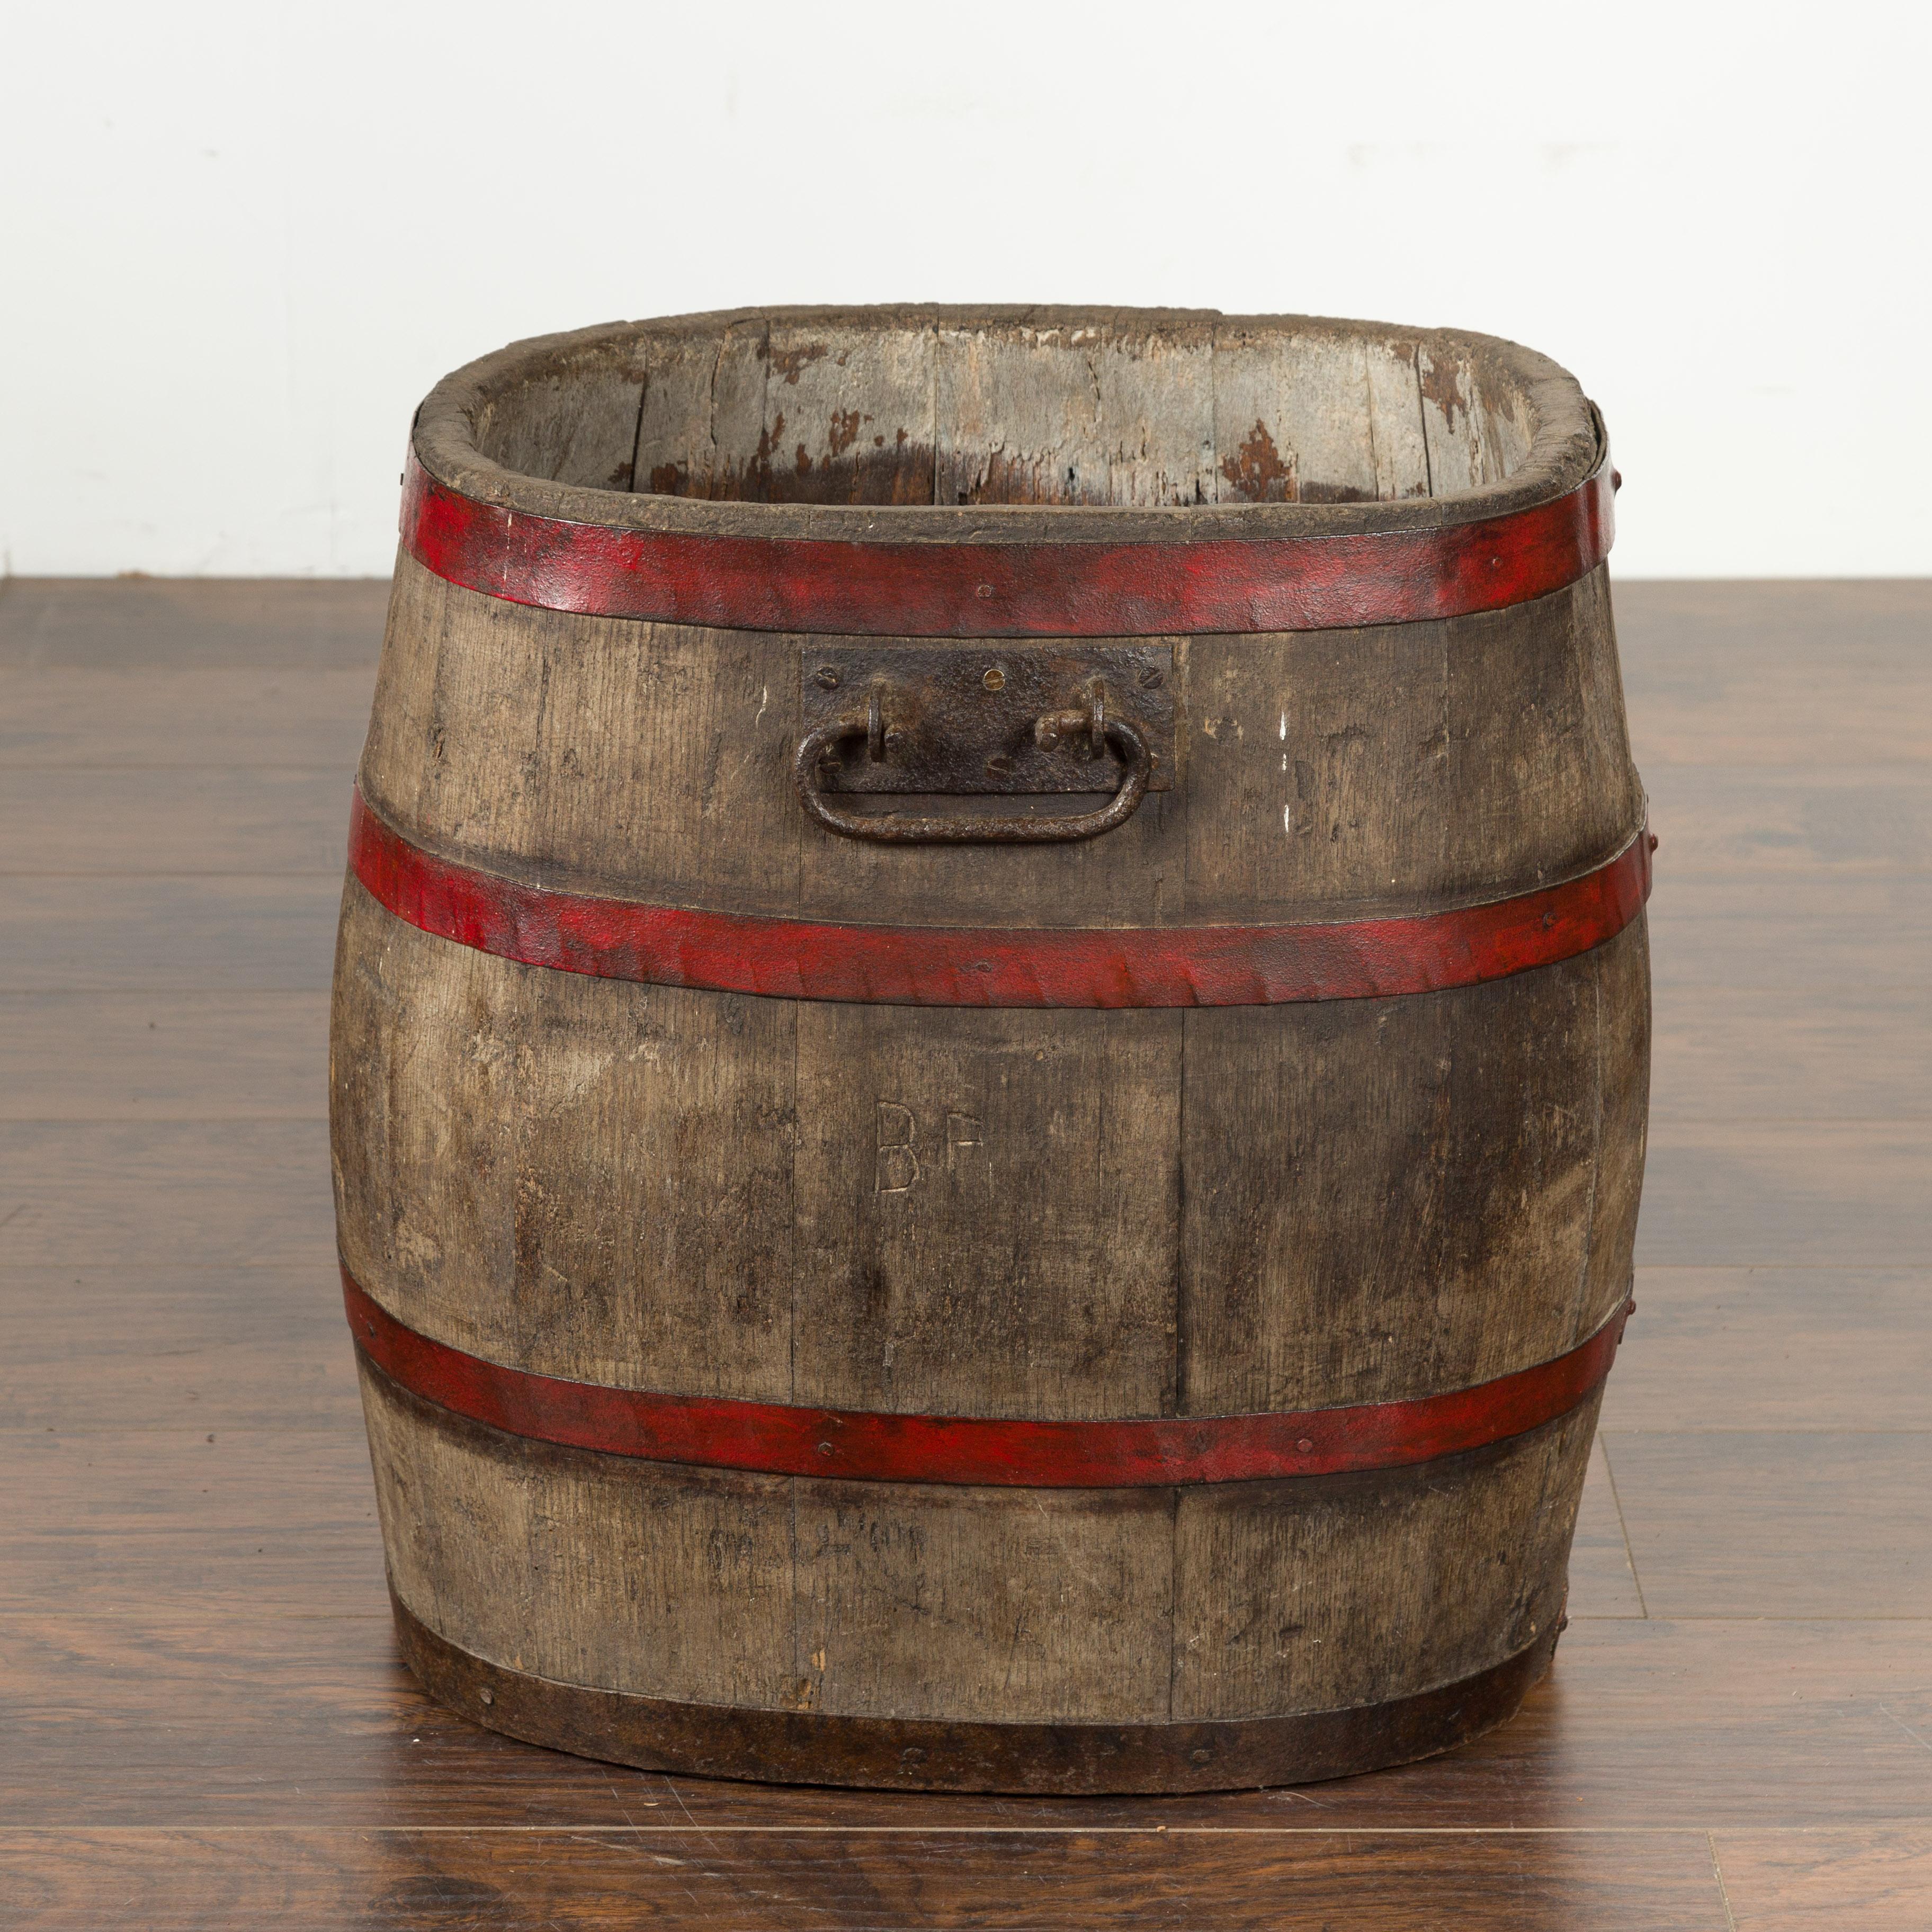 An English rustic oak barrel from the late 19th century, with red braces and weathered patina. Created in England during the last quarter of the 19th century, this barrel charms us with its nice proportions and rustic presence. Accented with red